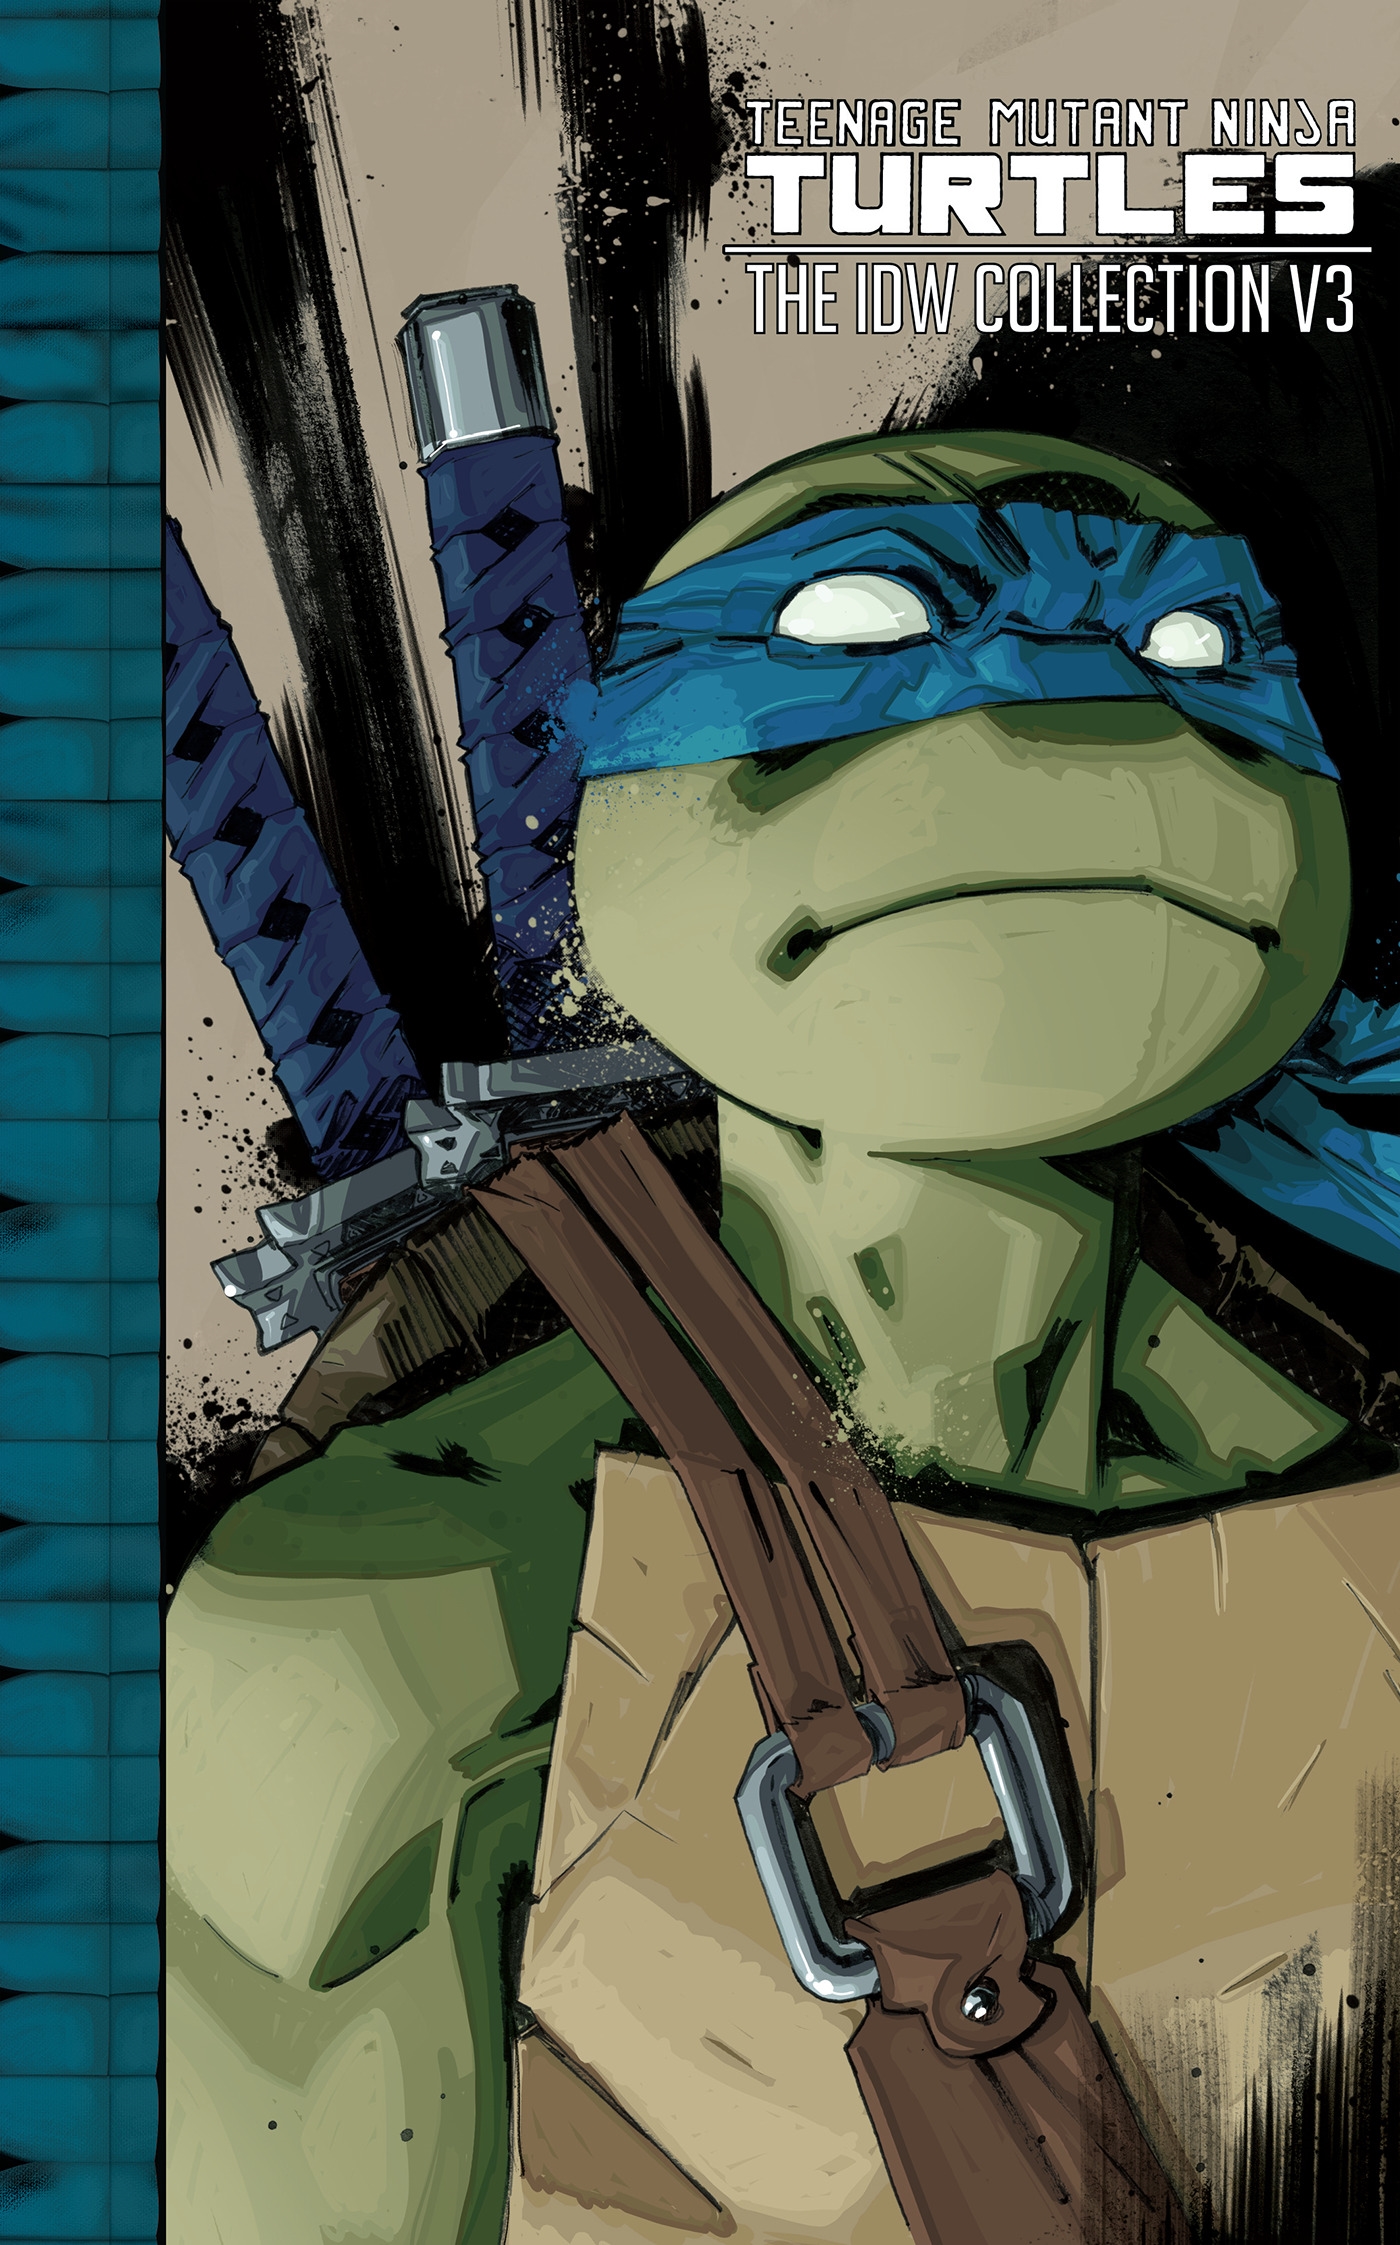 Teenage Mutant Ninja Turtles The IDW Collection Volume 3 by Kevin